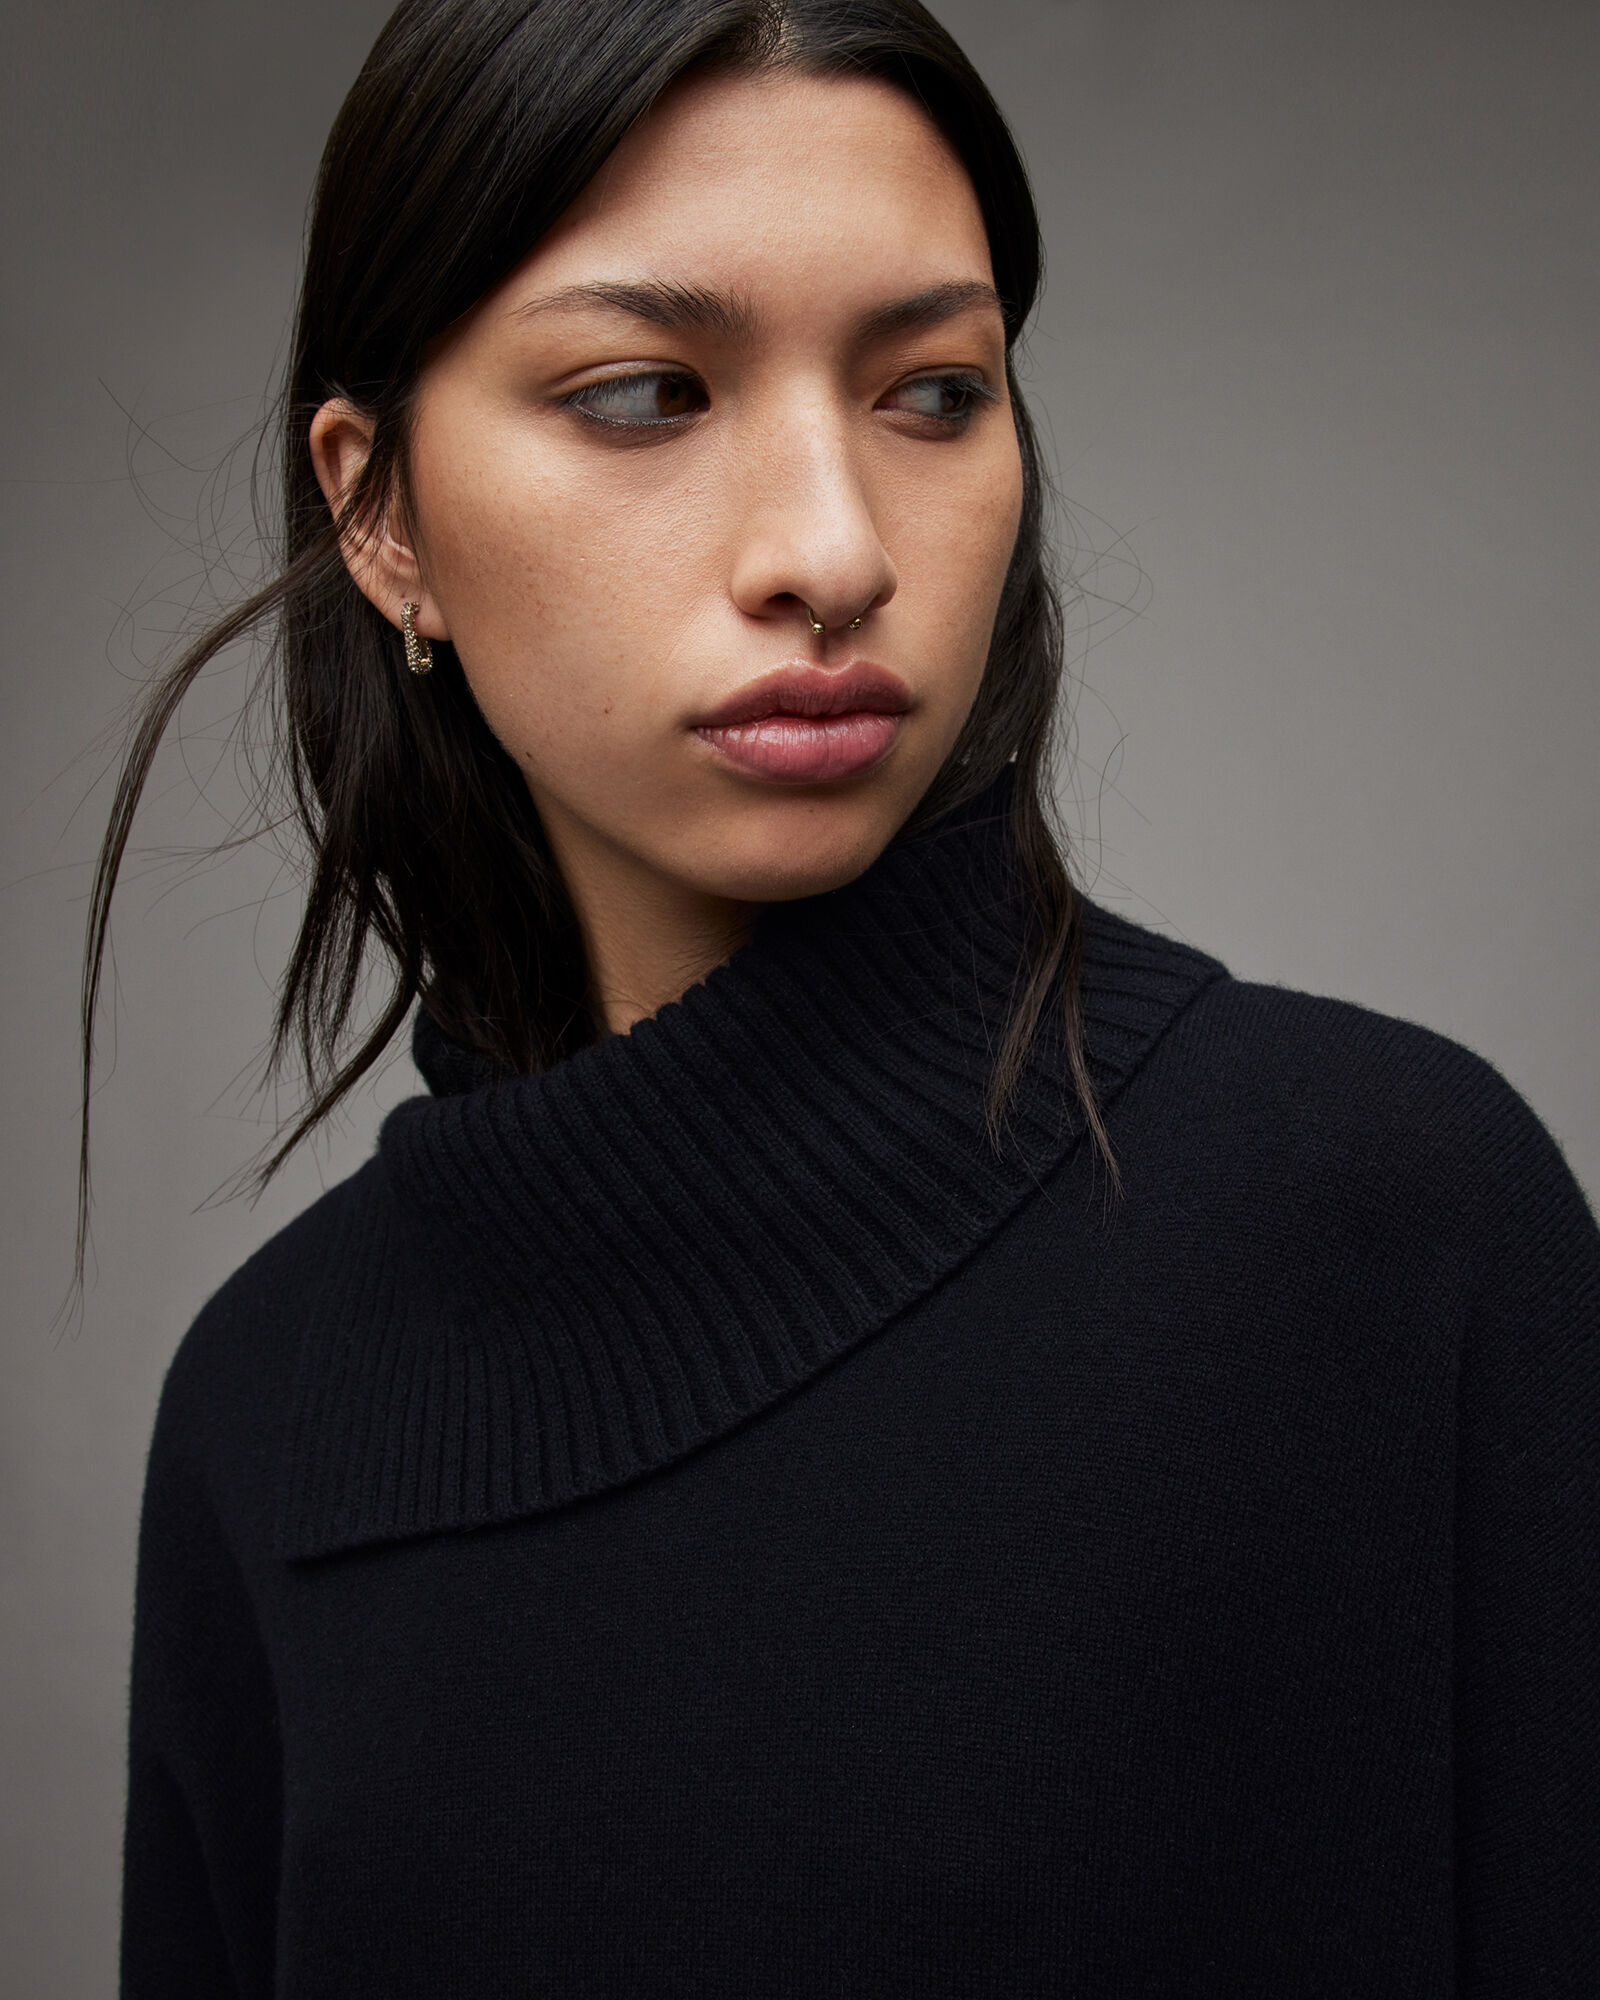 Whitby Cashmere Wool Sweater Black | ALLSAINTS US